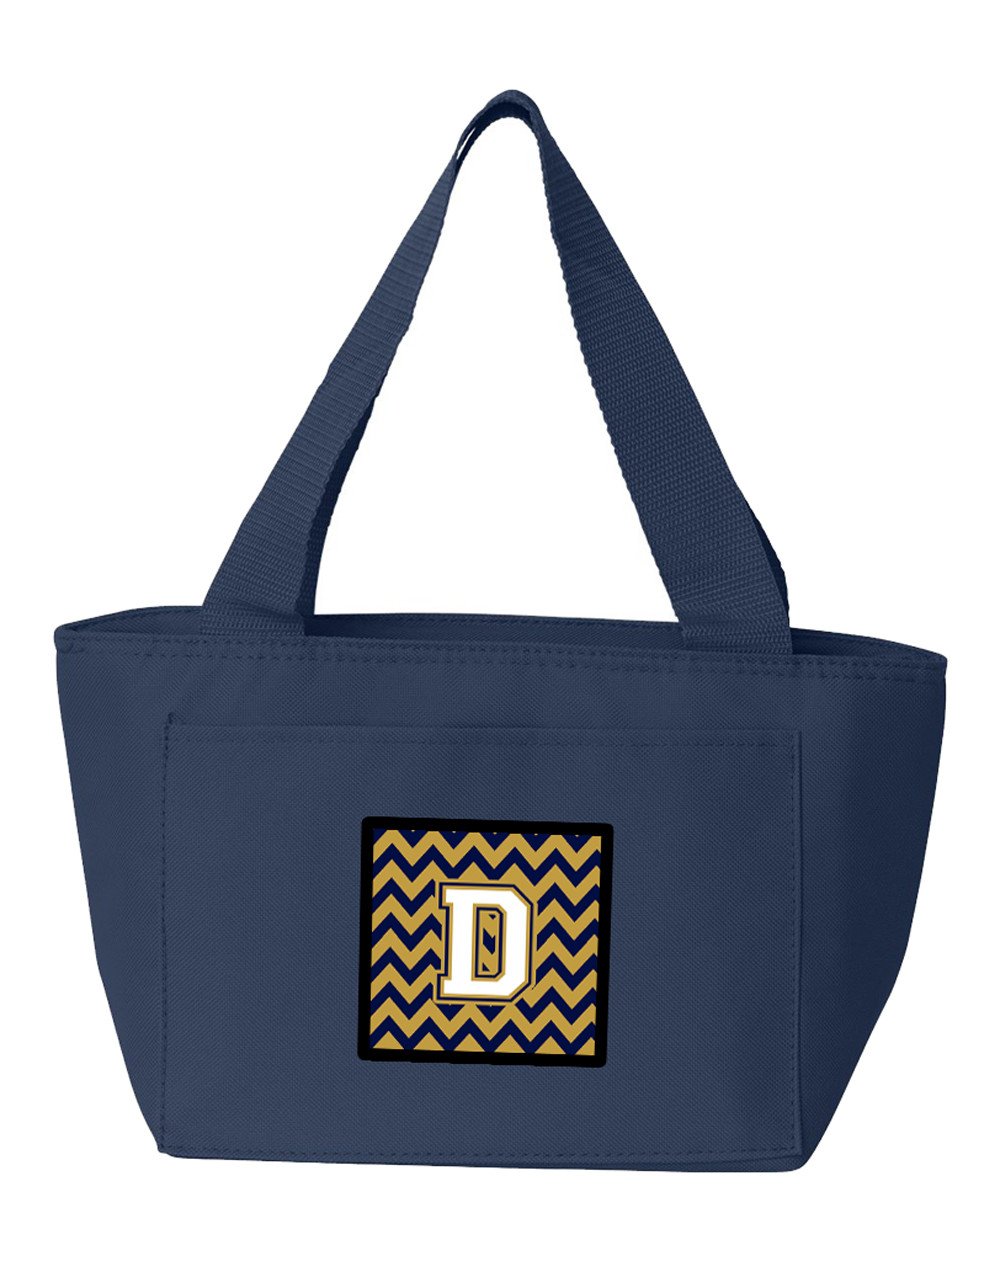 Letter D Chevron Navy Blue and Gold Lunch Bag CJ1057-DNA-8808 by Caroline's Treasures